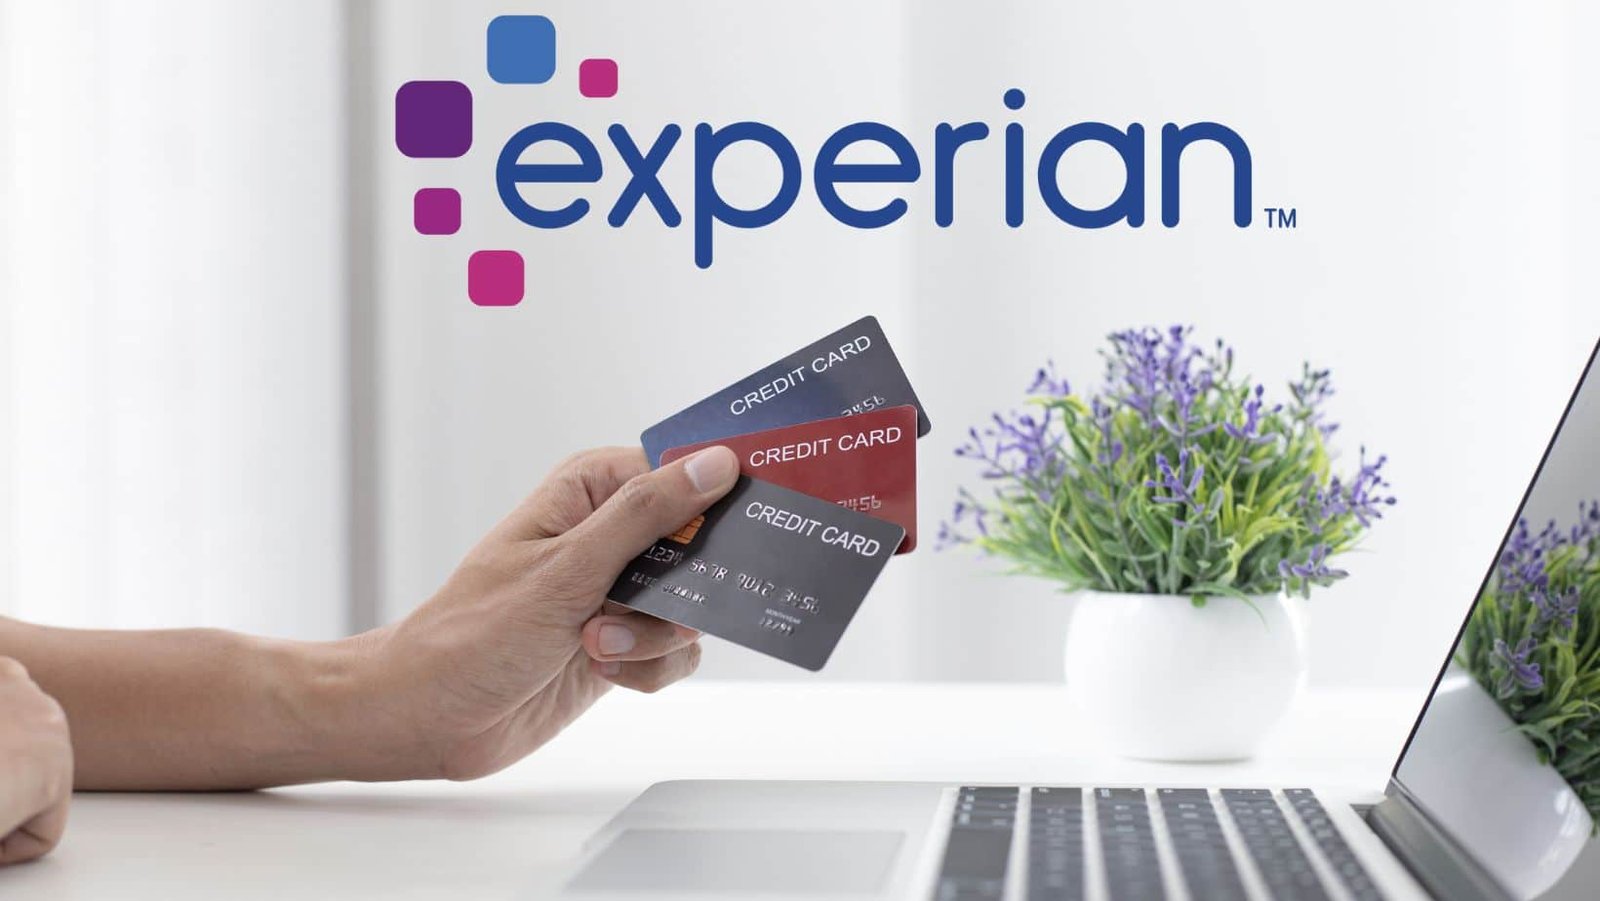 Experian credit card recommendations